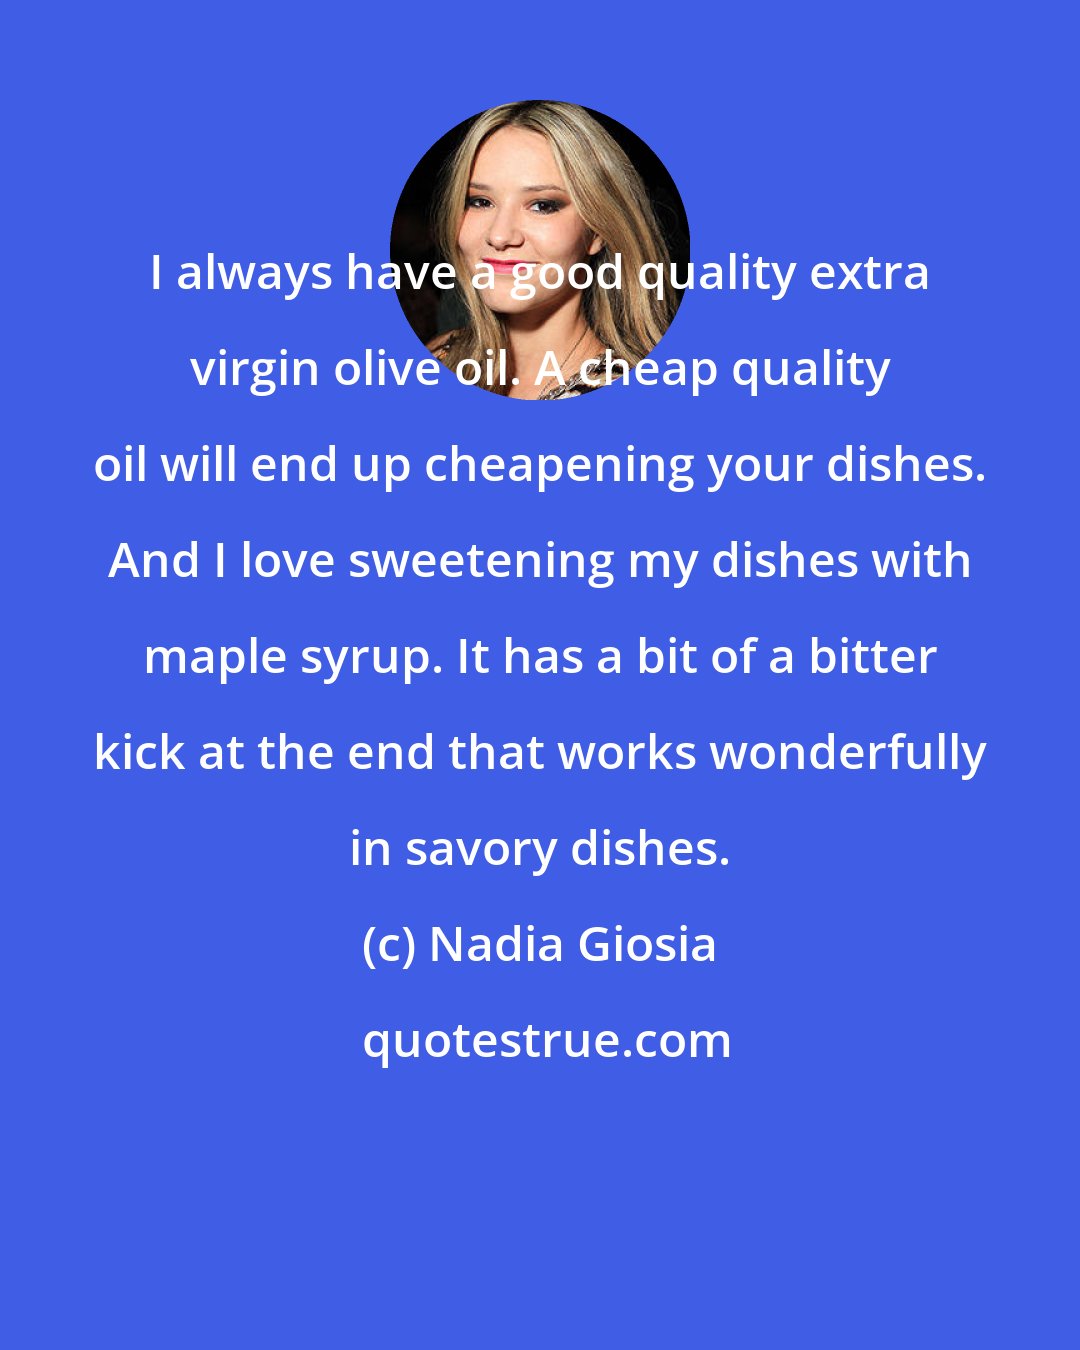 Nadia Giosia: I always have a good quality extra virgin olive oil. A cheap quality oil will end up cheapening your dishes. And I love sweetening my dishes with maple syrup. It has a bit of a bitter kick at the end that works wonderfully in savory dishes.